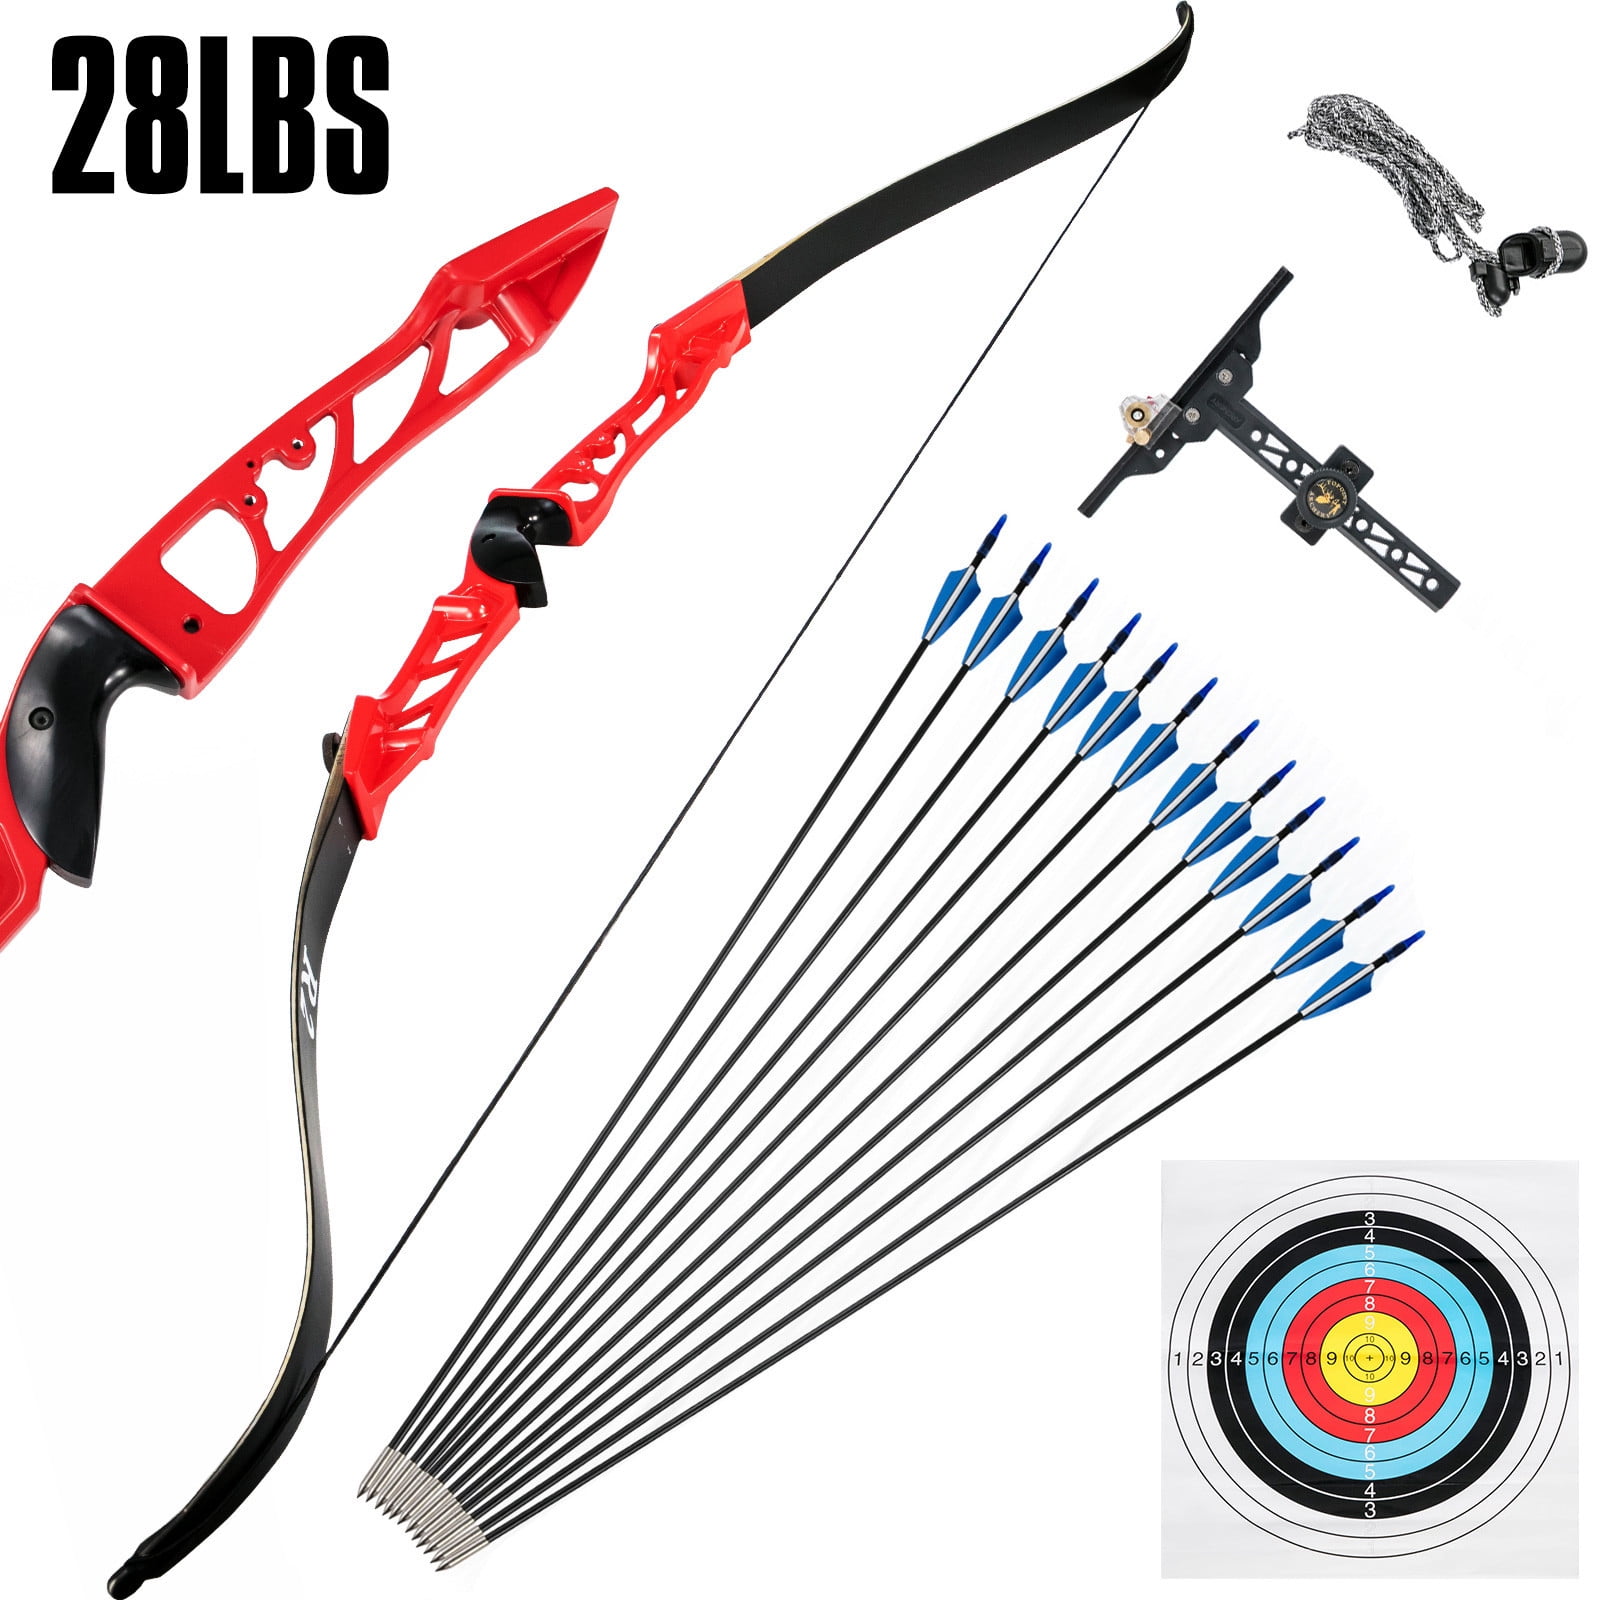 RH 68” Length Adult Core Pro Recurve Take Down Bow 20lbs Draw Weight. 